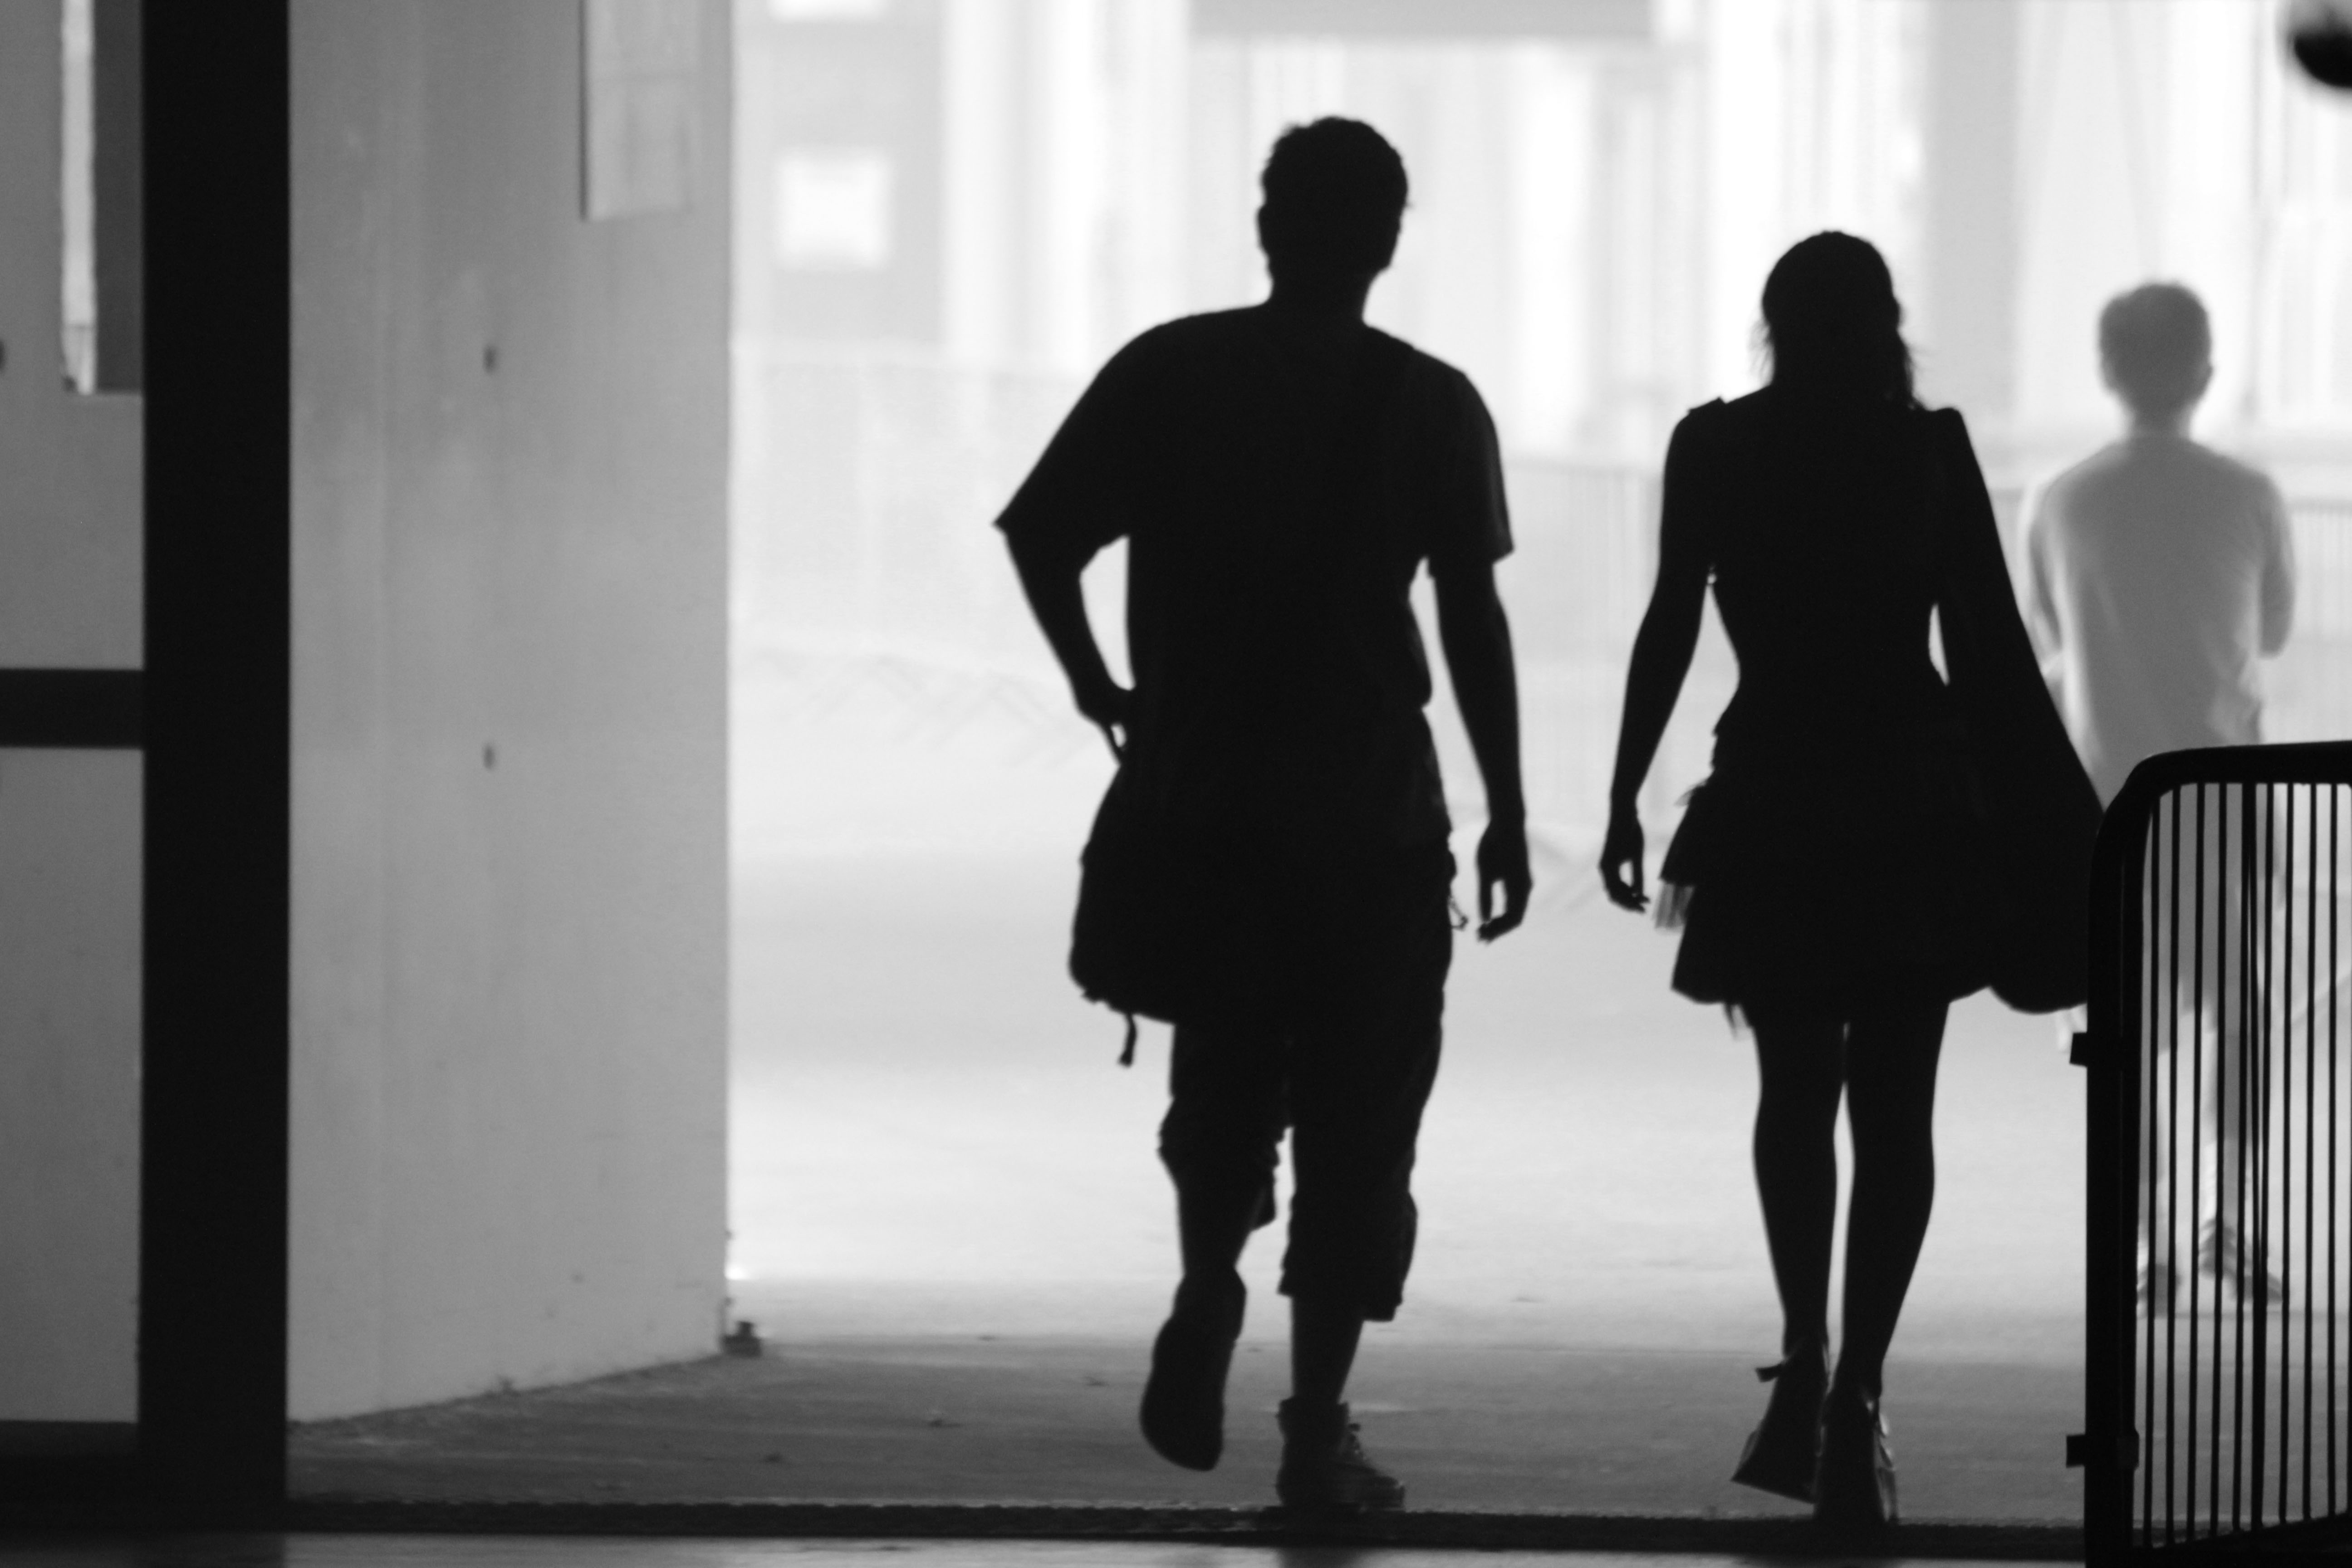 man_and_woman_silhouettes.jpg